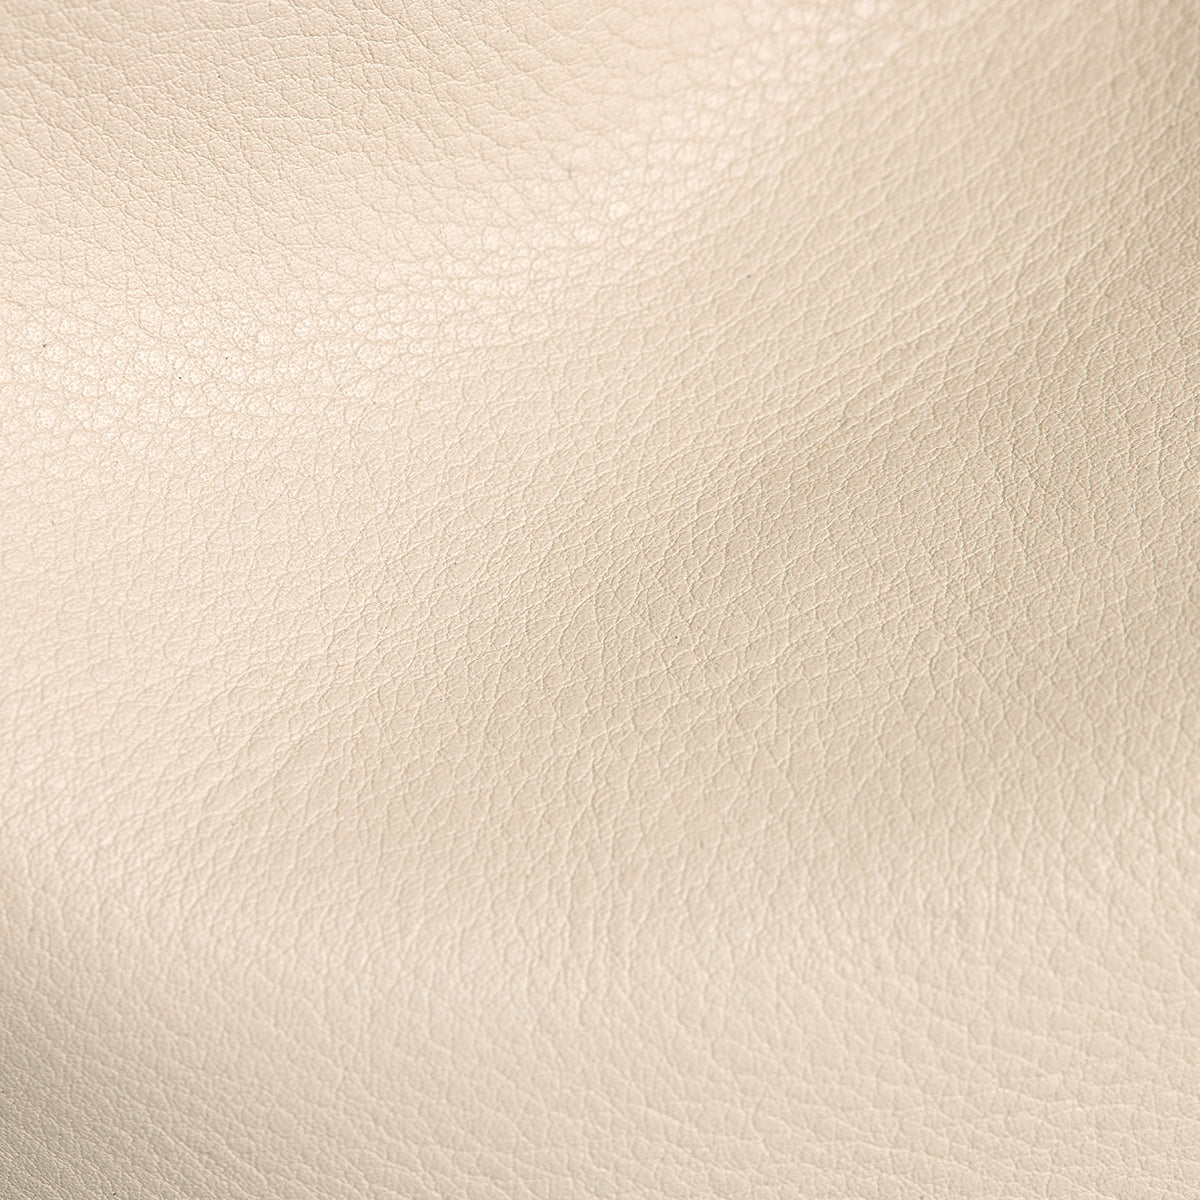 Curtis-Chateau-Cream-Leather-Swatch